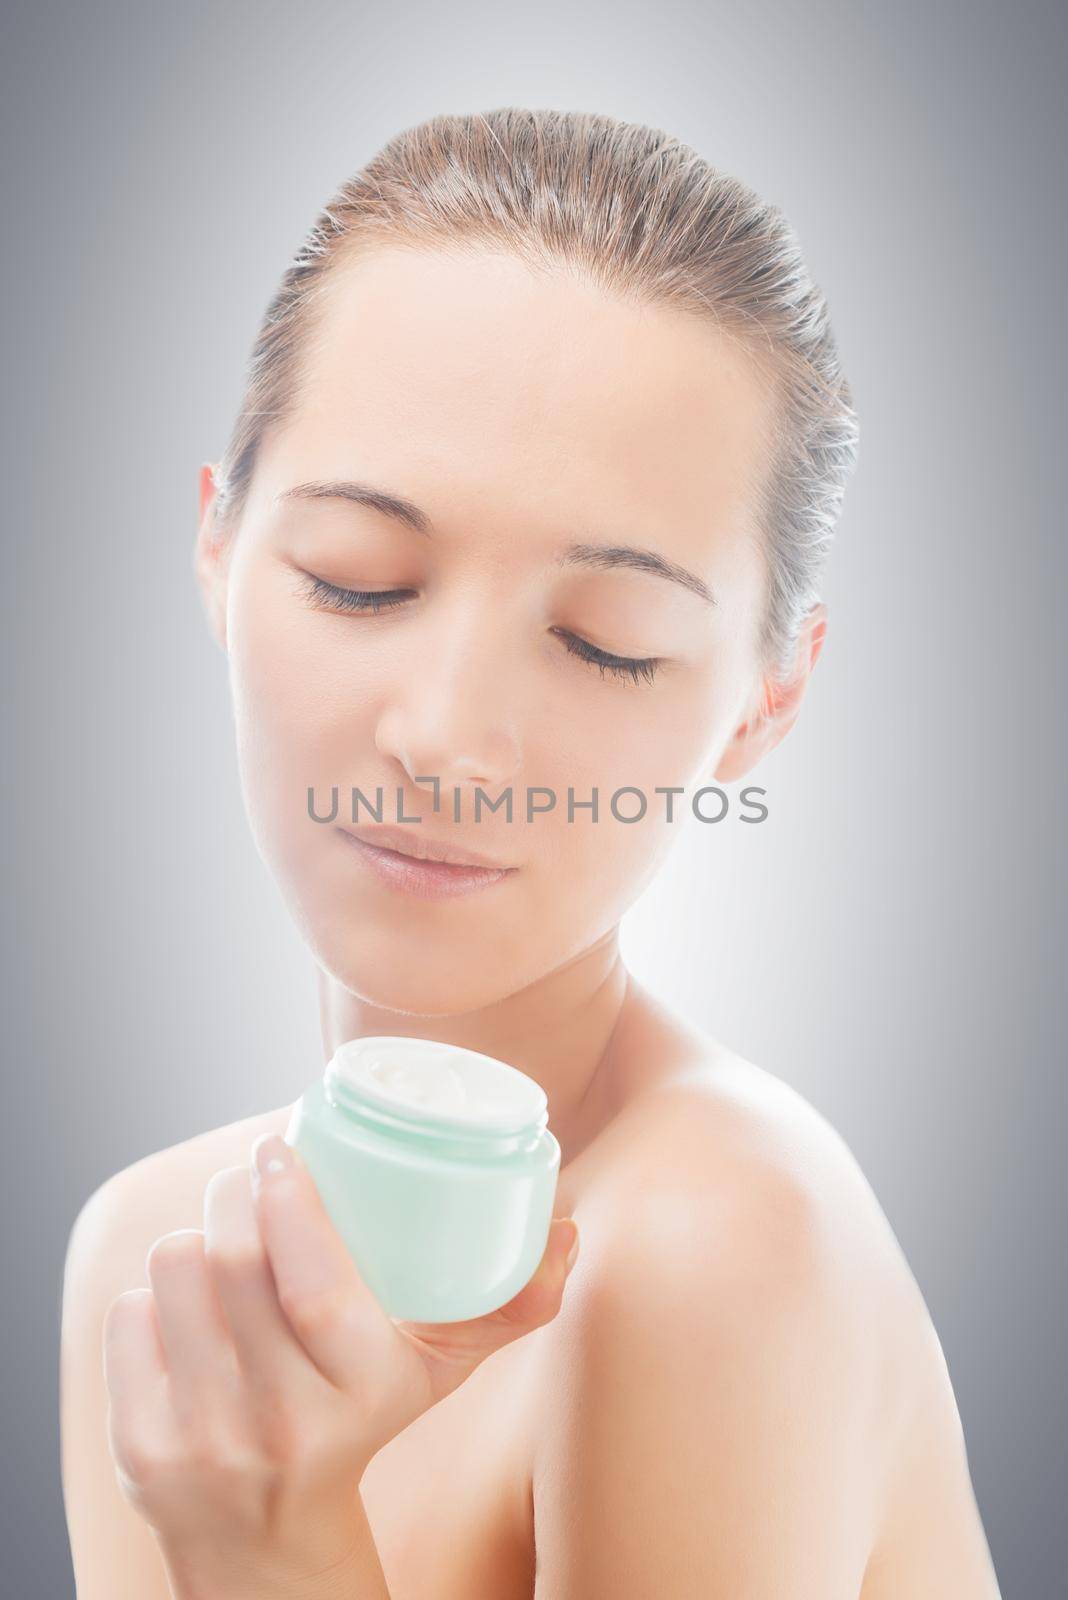 Woman looks at a jar of cream, concept of skincare